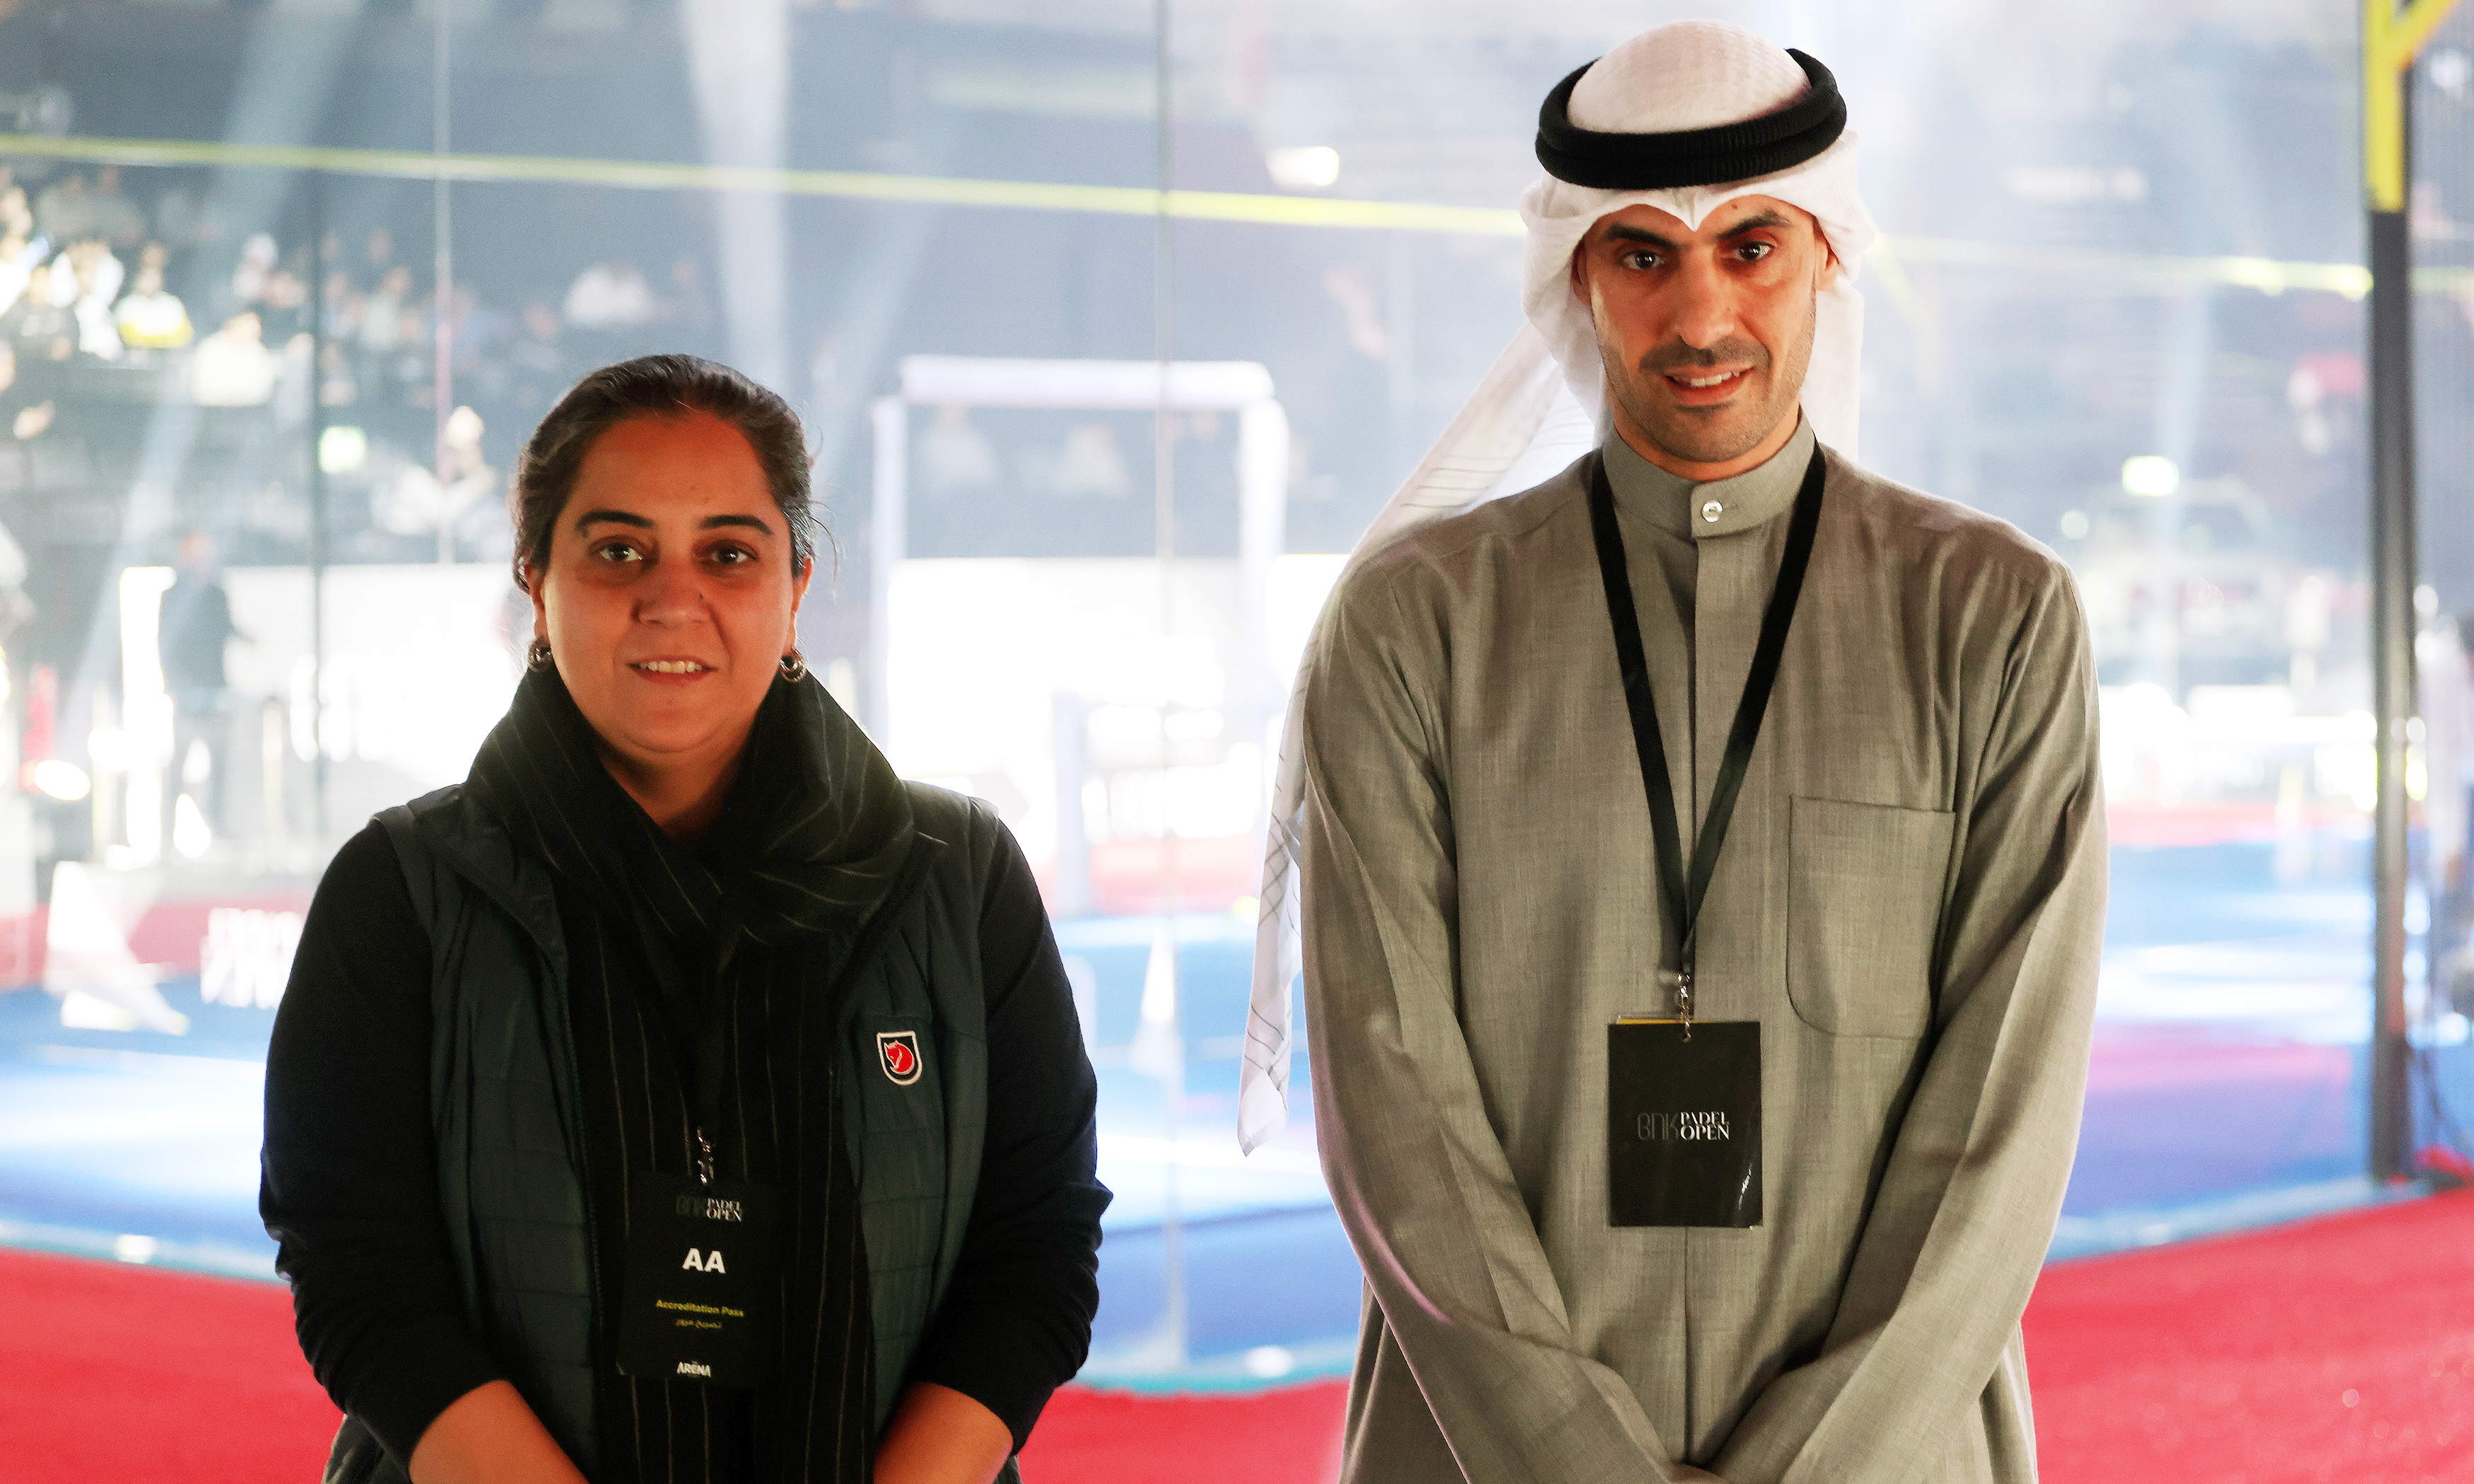 Bader Al-Kharafi (right) and Chairperson of the women's sports committee and member of Kuwait Olympic Committee Fatma Hayat (left).